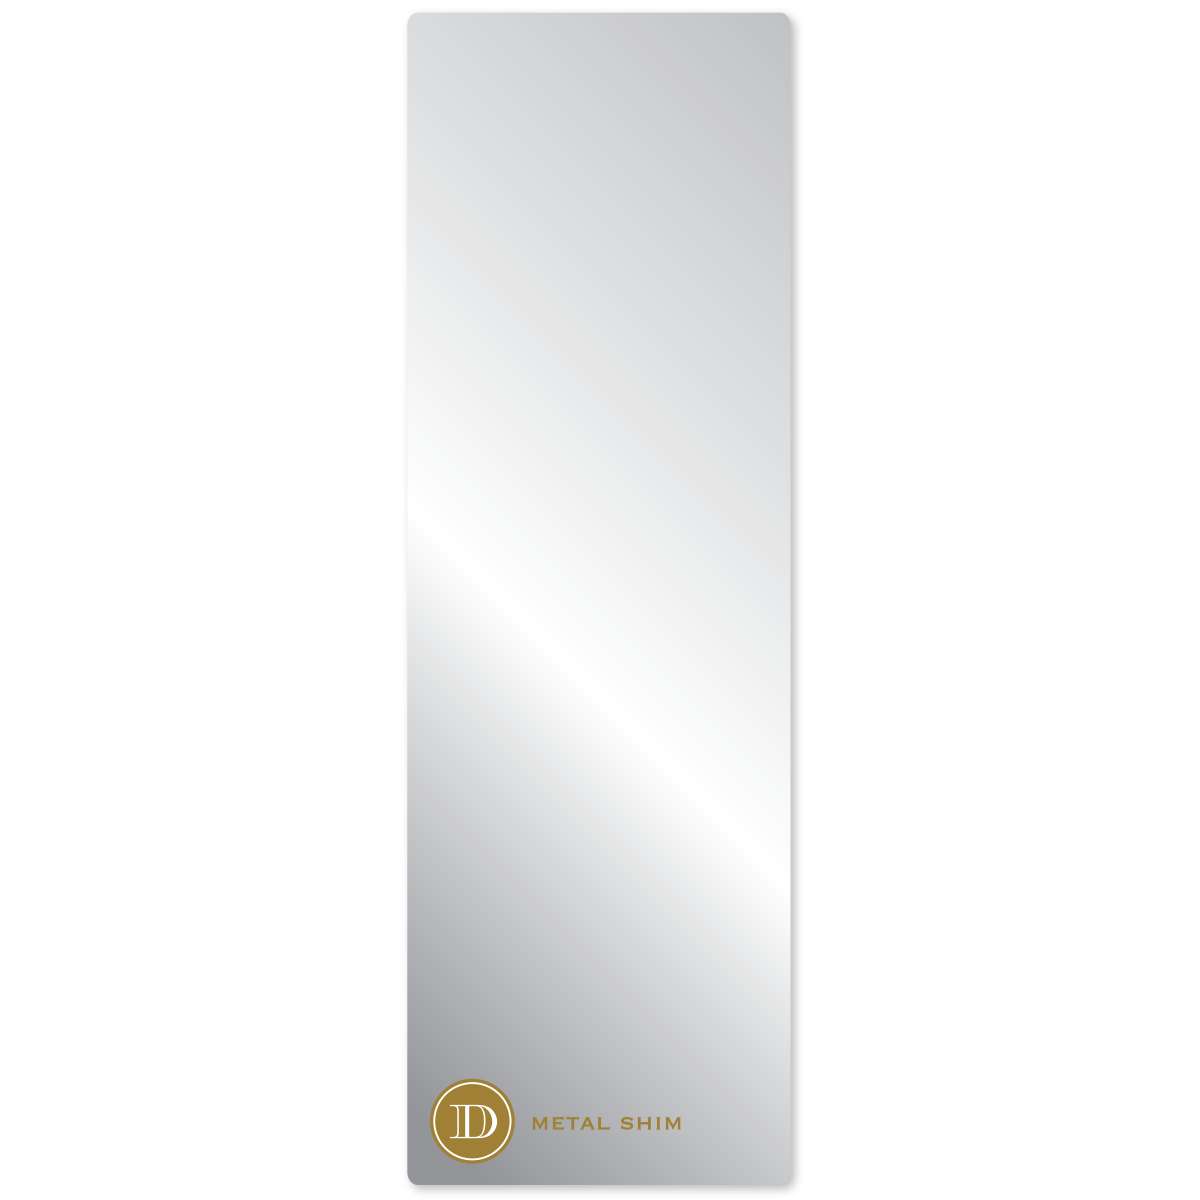 a mirror with a gold emblem on it.